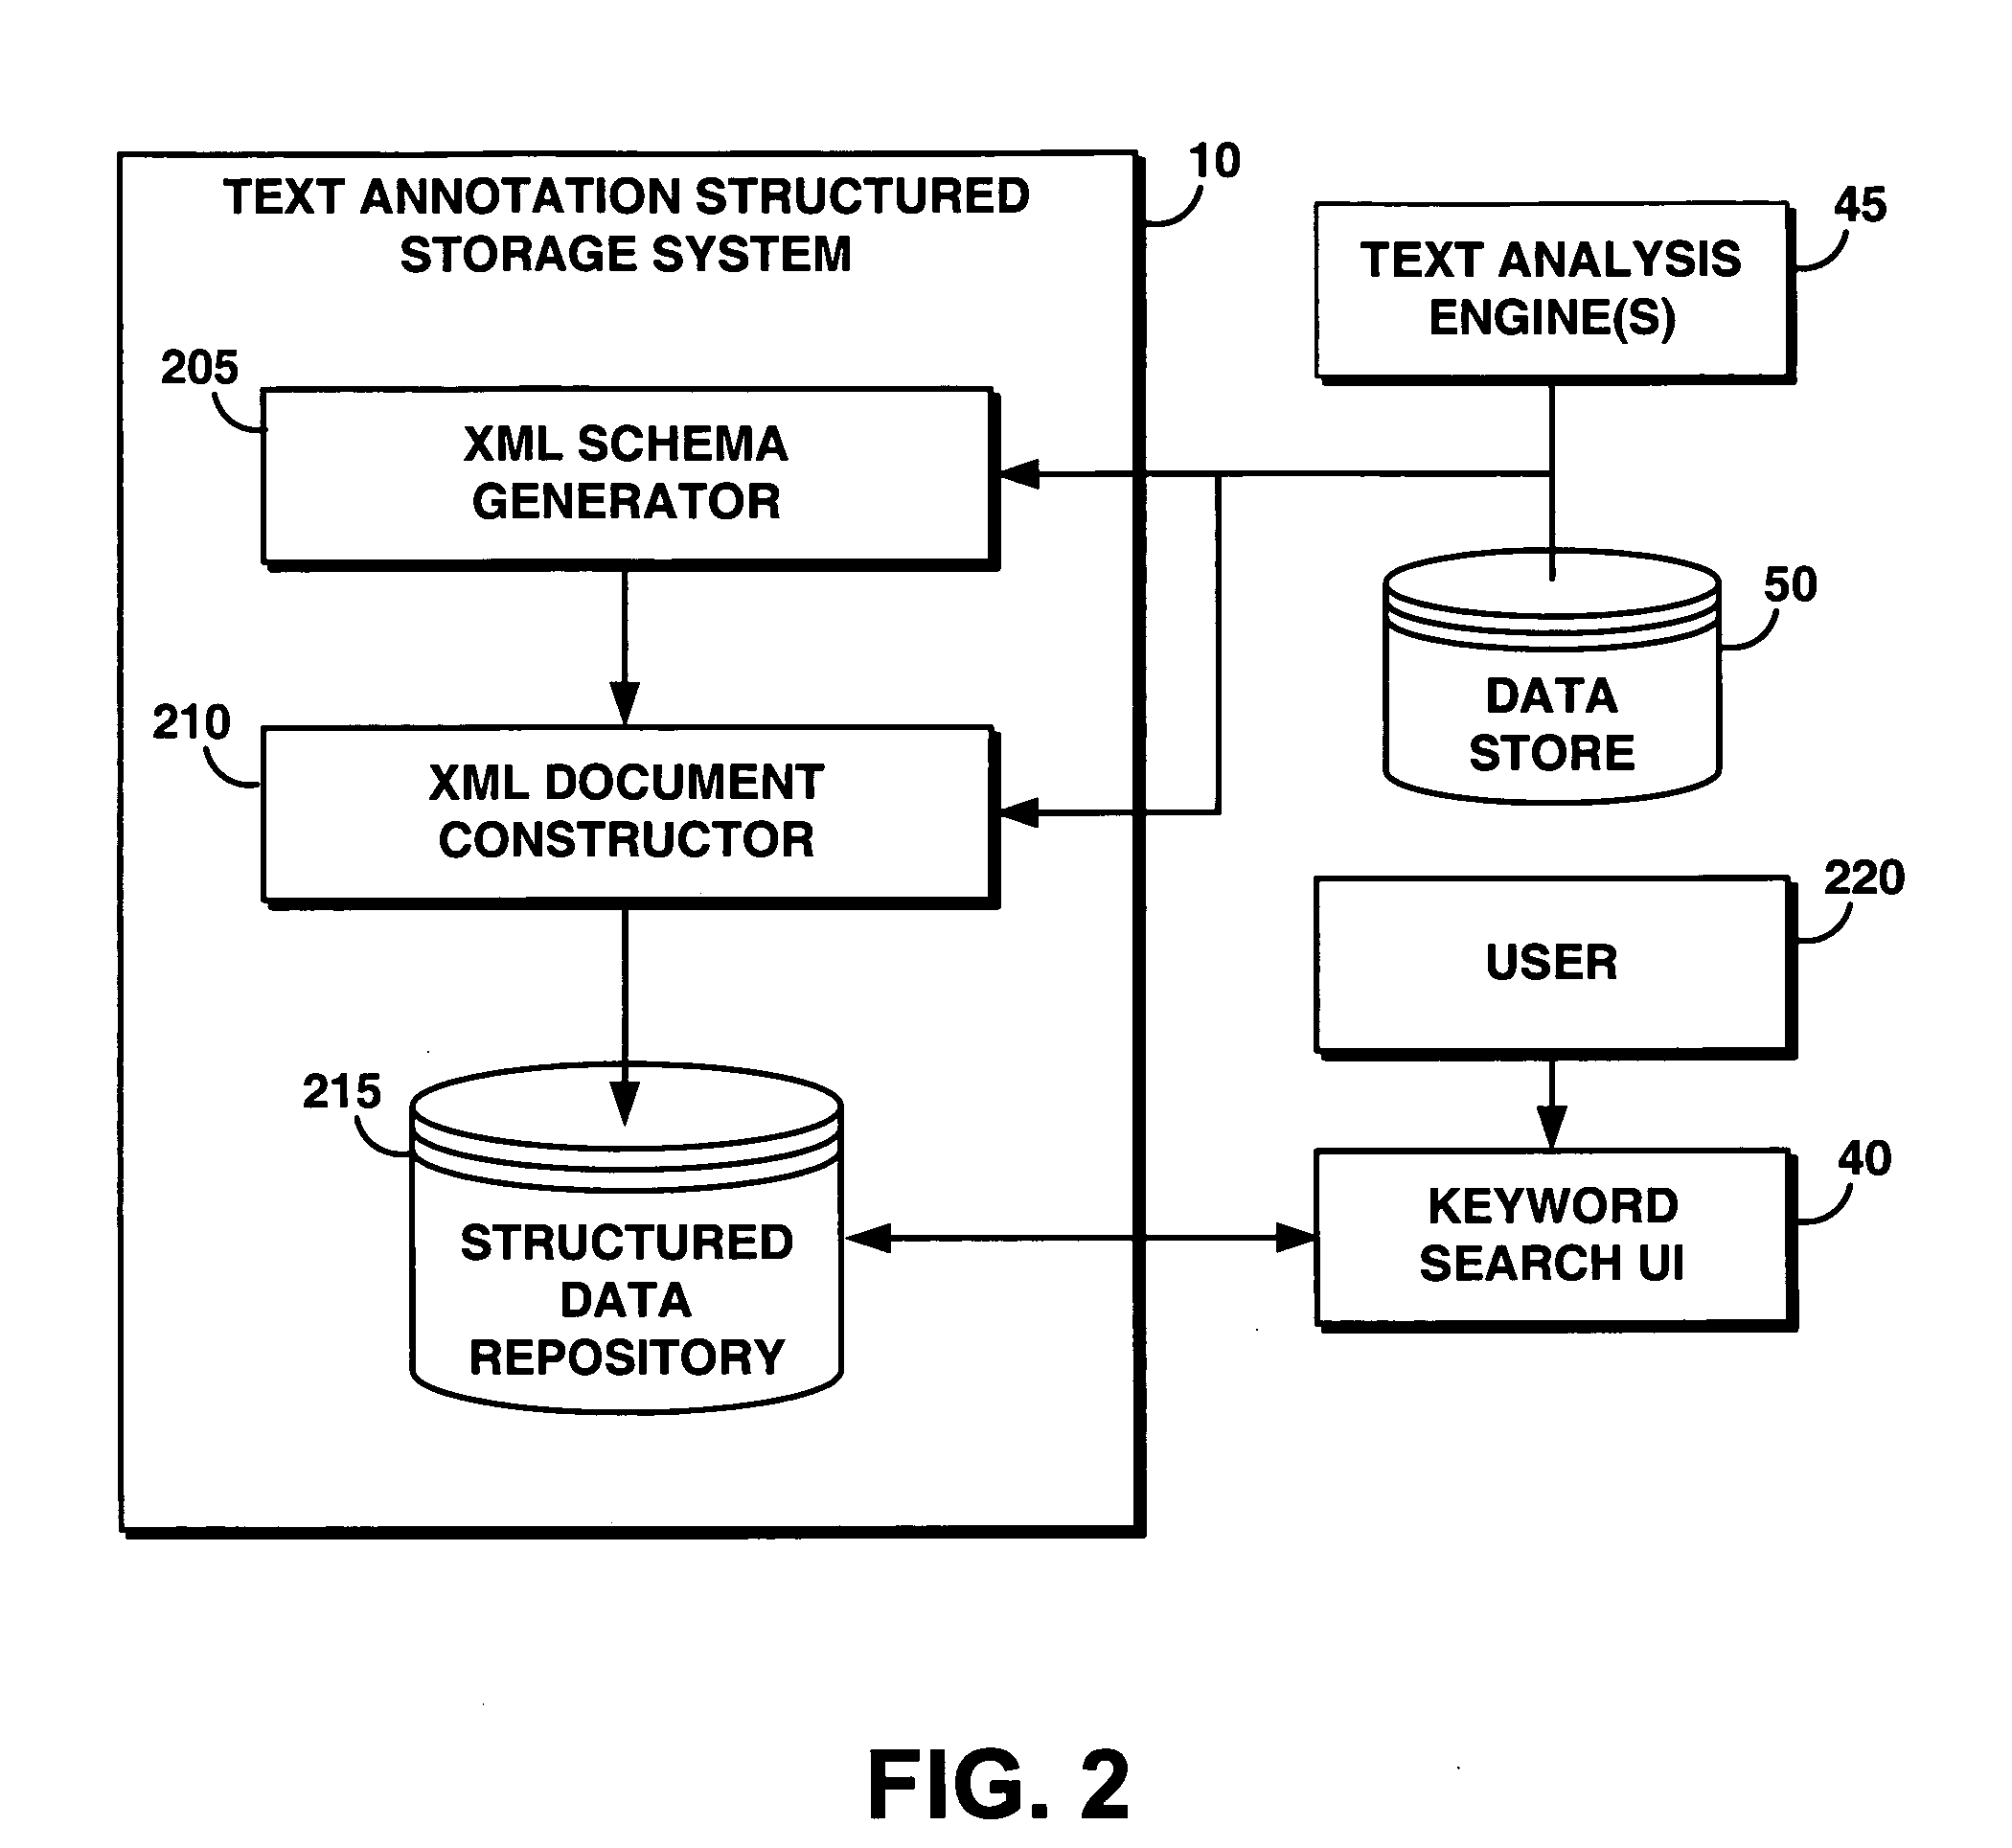 System and method for storing text annotations with associated type information in a structured data store